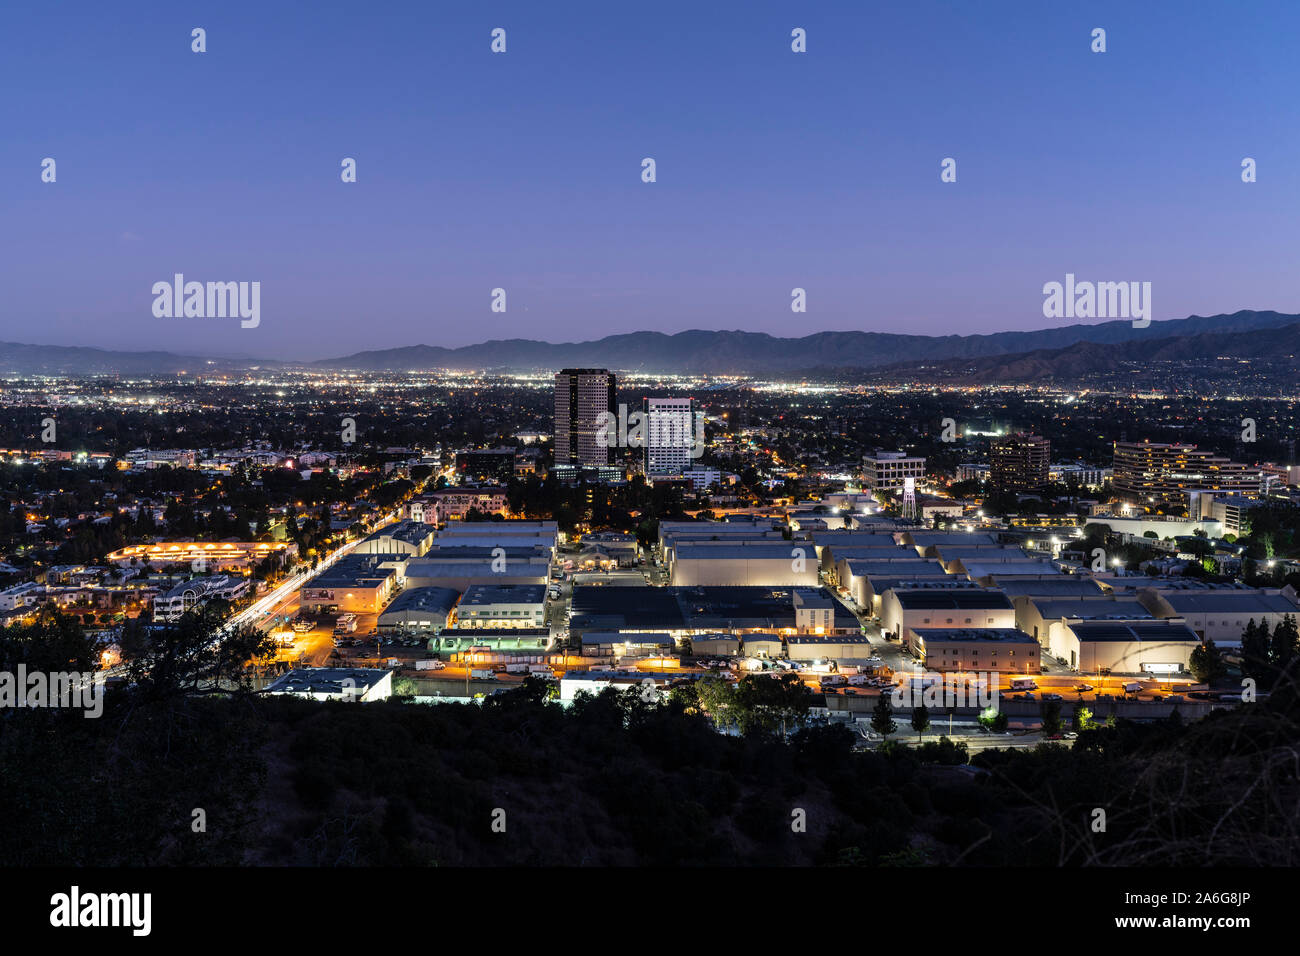 Burbank, California, USA - October 25, 2019:  Twilight predawn morning view of historic Warner Bros studio sound stages and Burbank Media District. Stock Photo